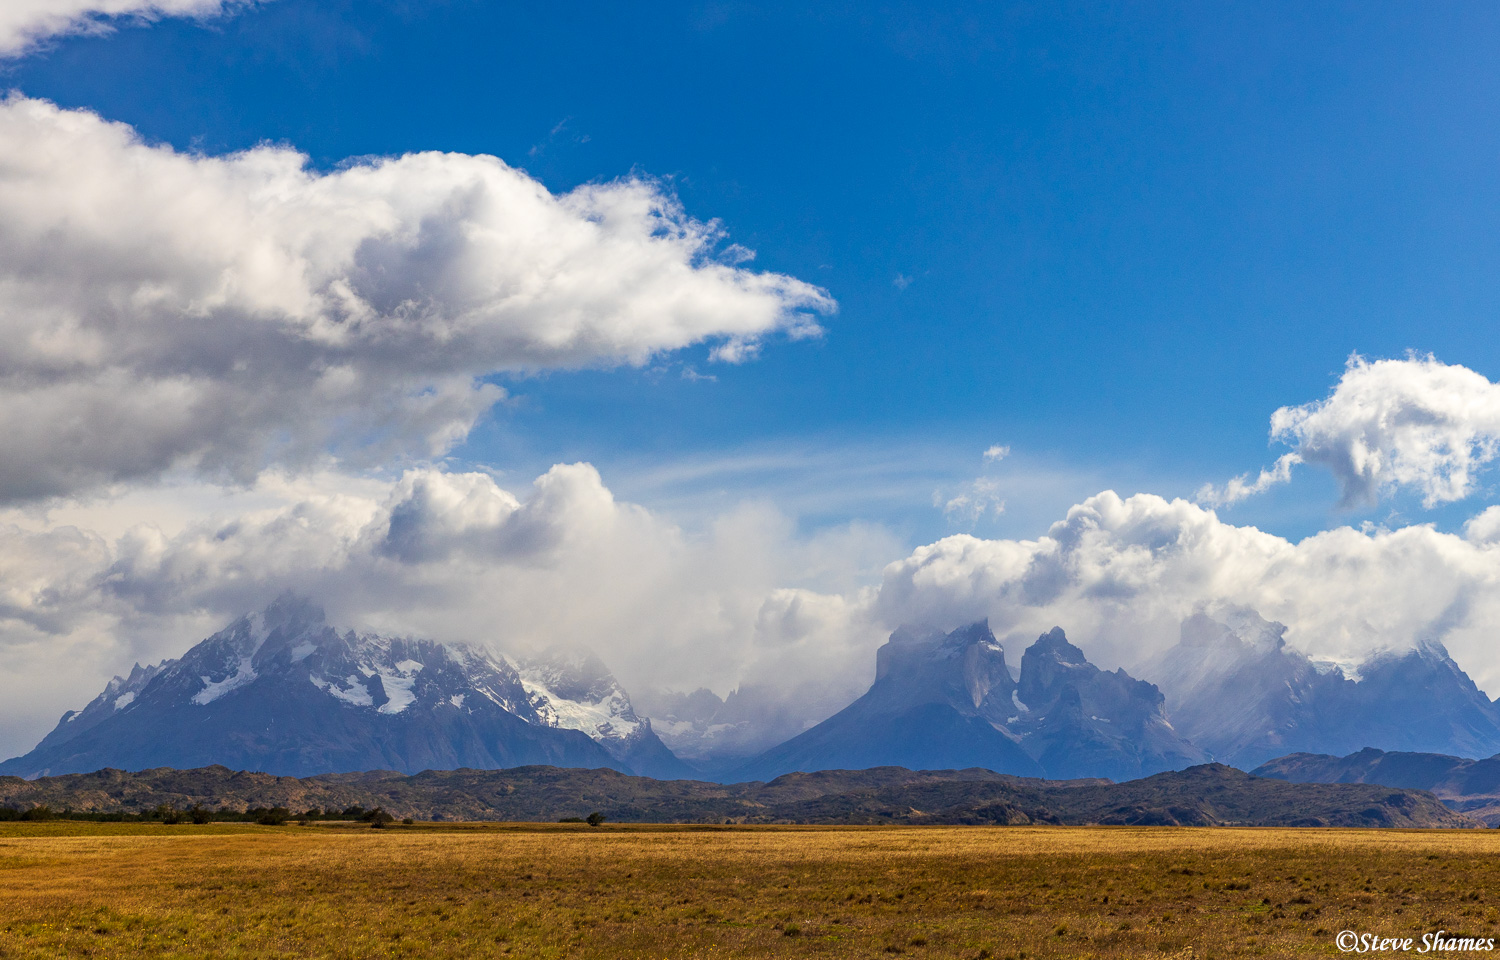 And here is Los Cuernos, under a great Patagonia sky.